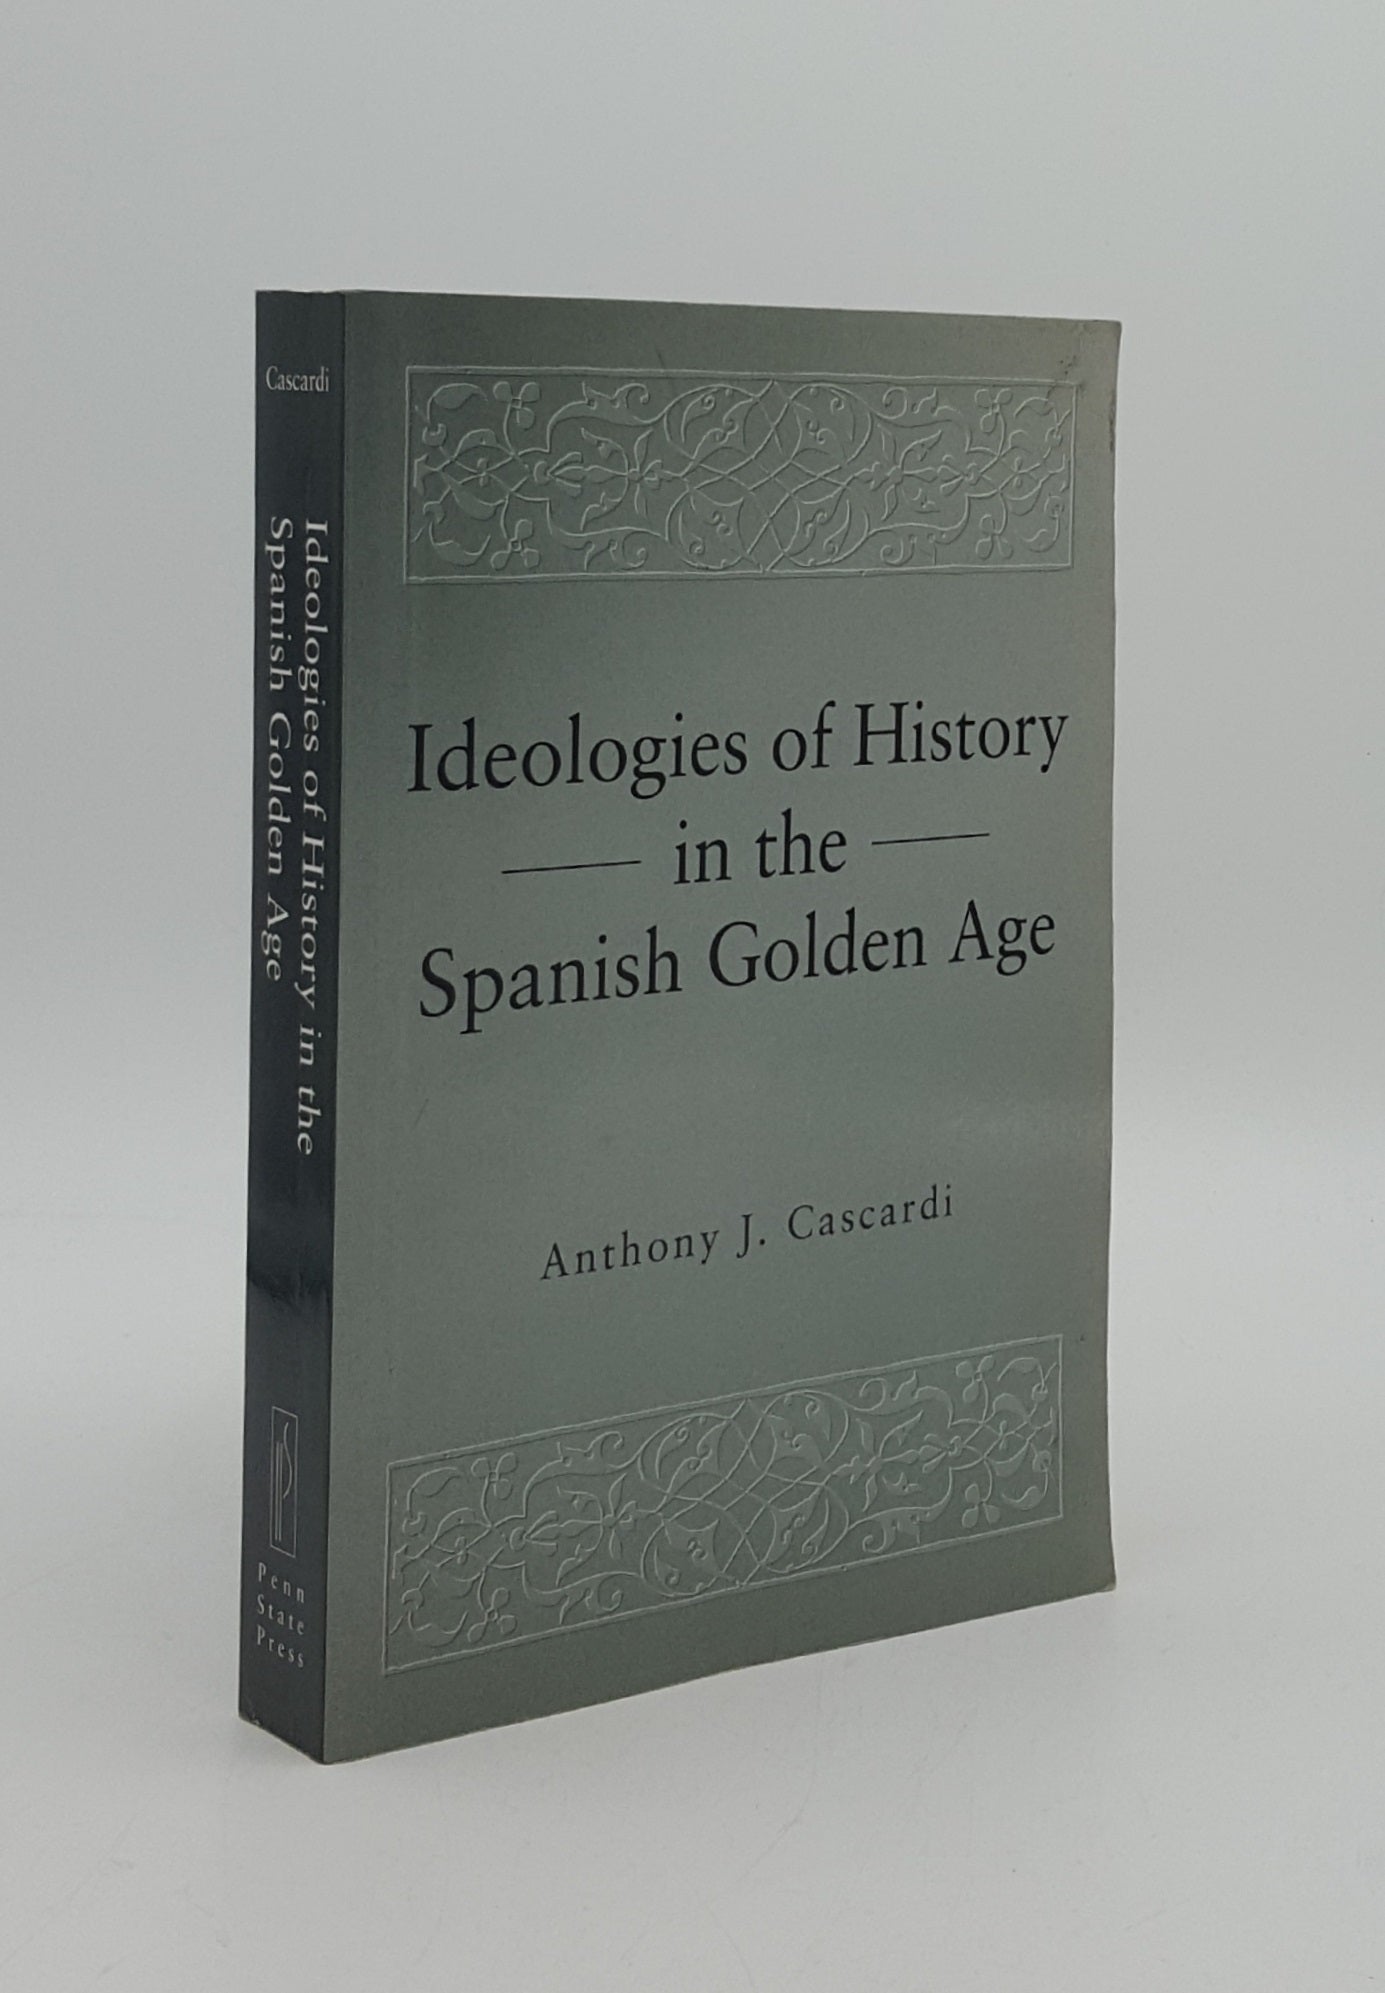 CASCARDI Anthony J. - Ideologies of History in the Spanish Golden Age